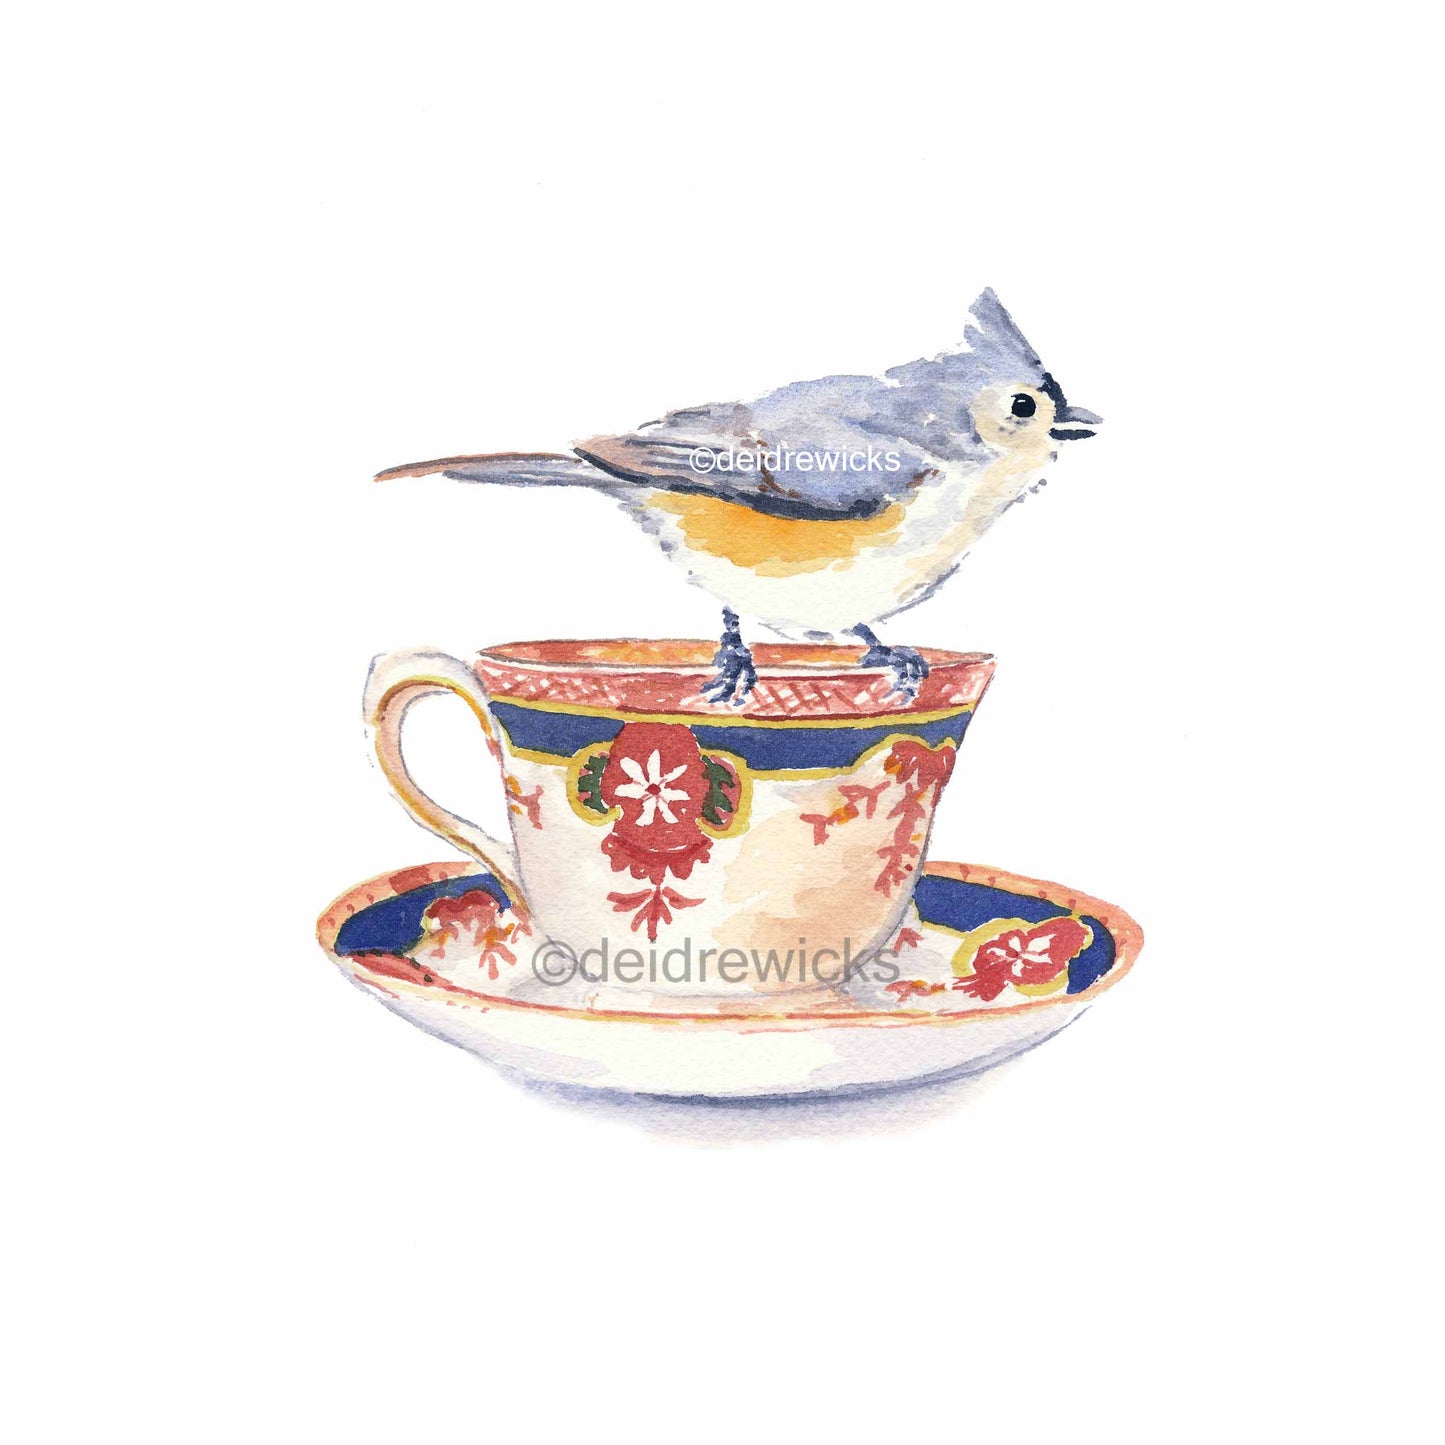 Watercolour painting of a tufted titmouse bird on a tea cup